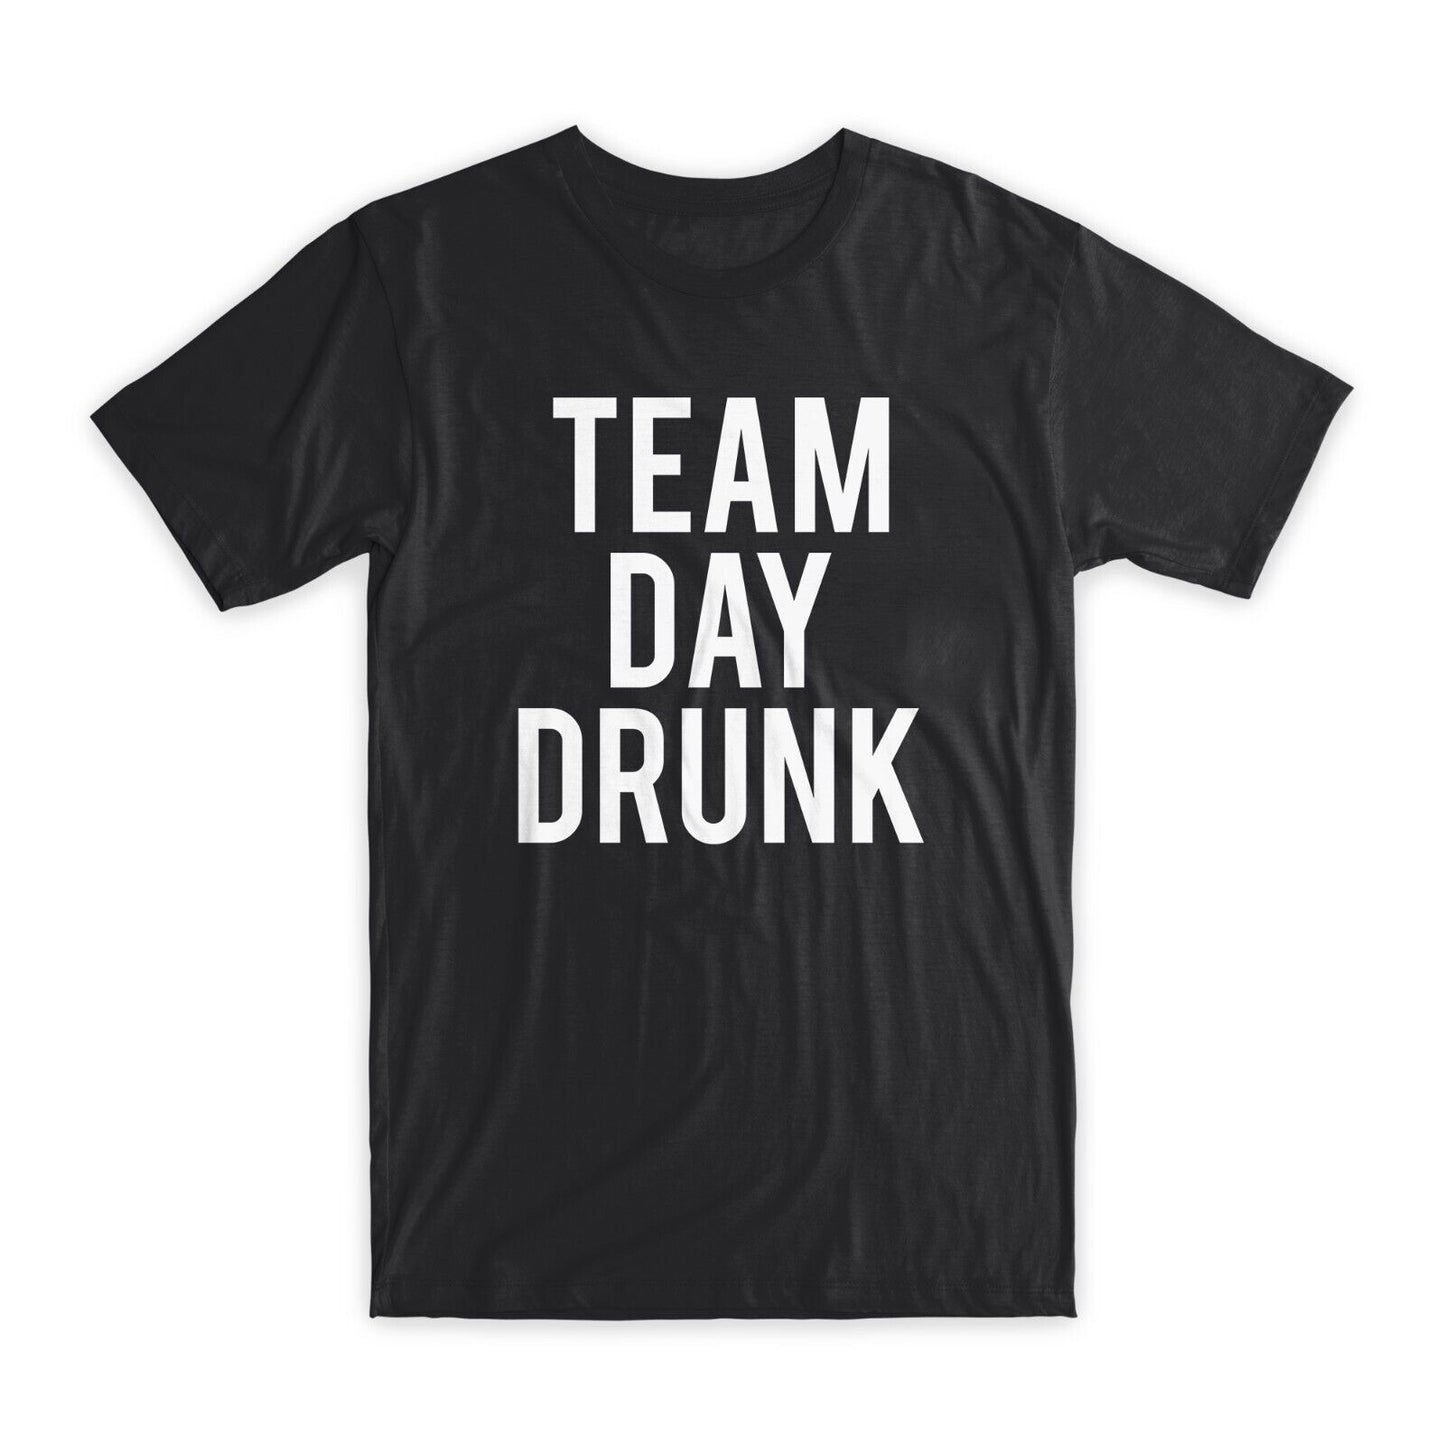 Team Day Drunk T-Shirt Premium Soft Cotton Crew Neck Funny Tees Novelty Gift NEW